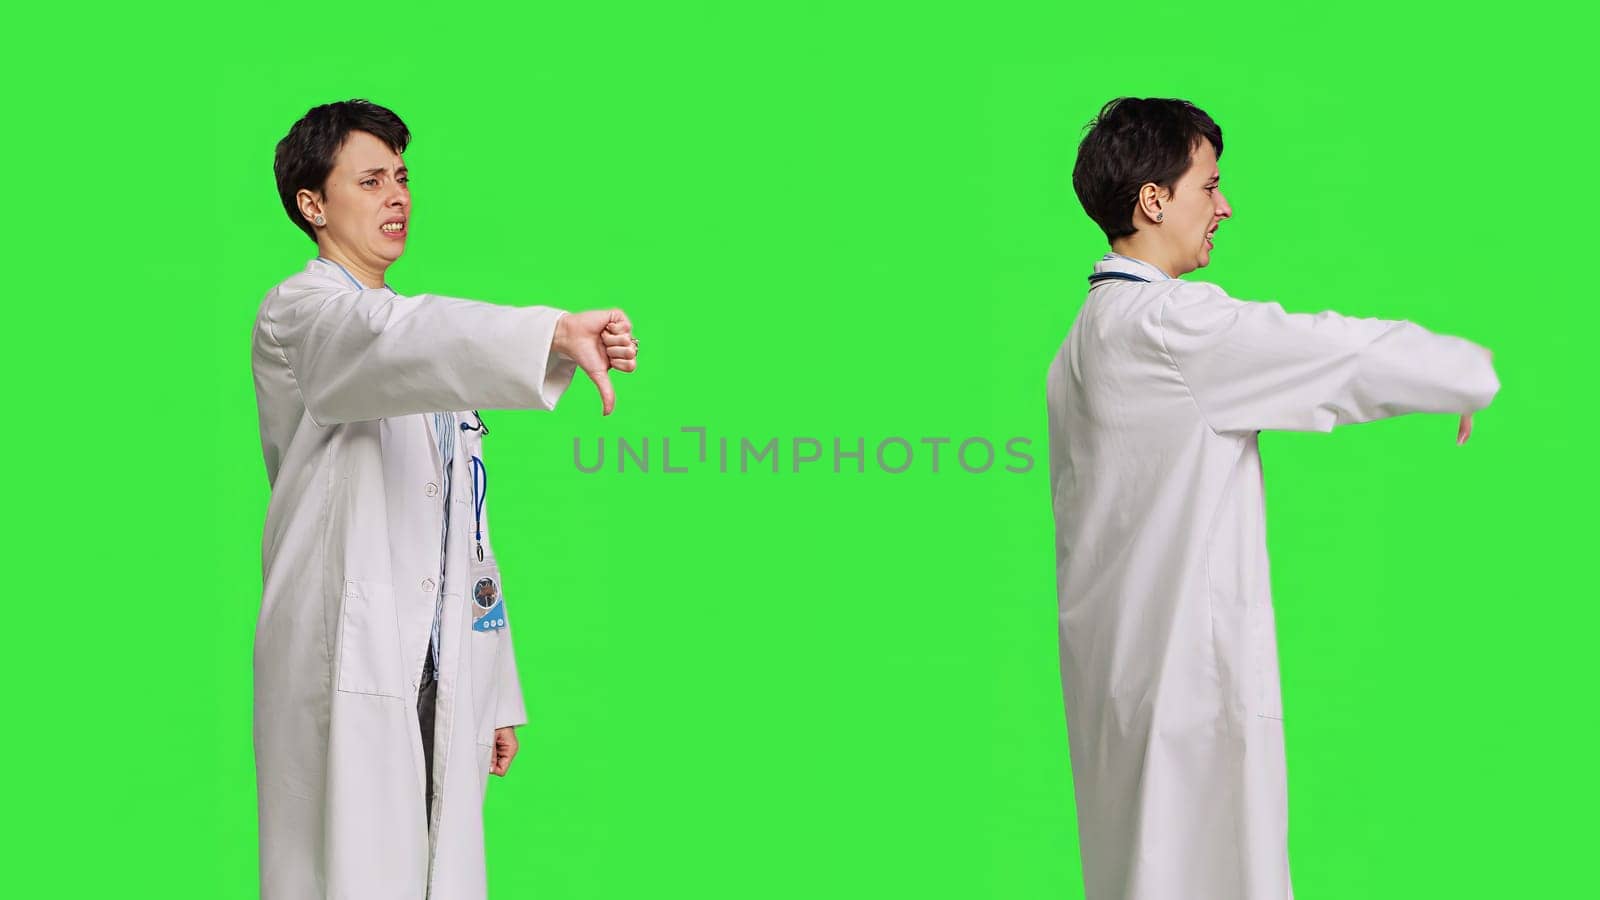 Displeased physician showing thumbs down symbol against greenscreen backdrop, expresses negativity and rejection. Doctor feeling dissatisfied and disagreeing with an idea, dislike sign. Camera B.